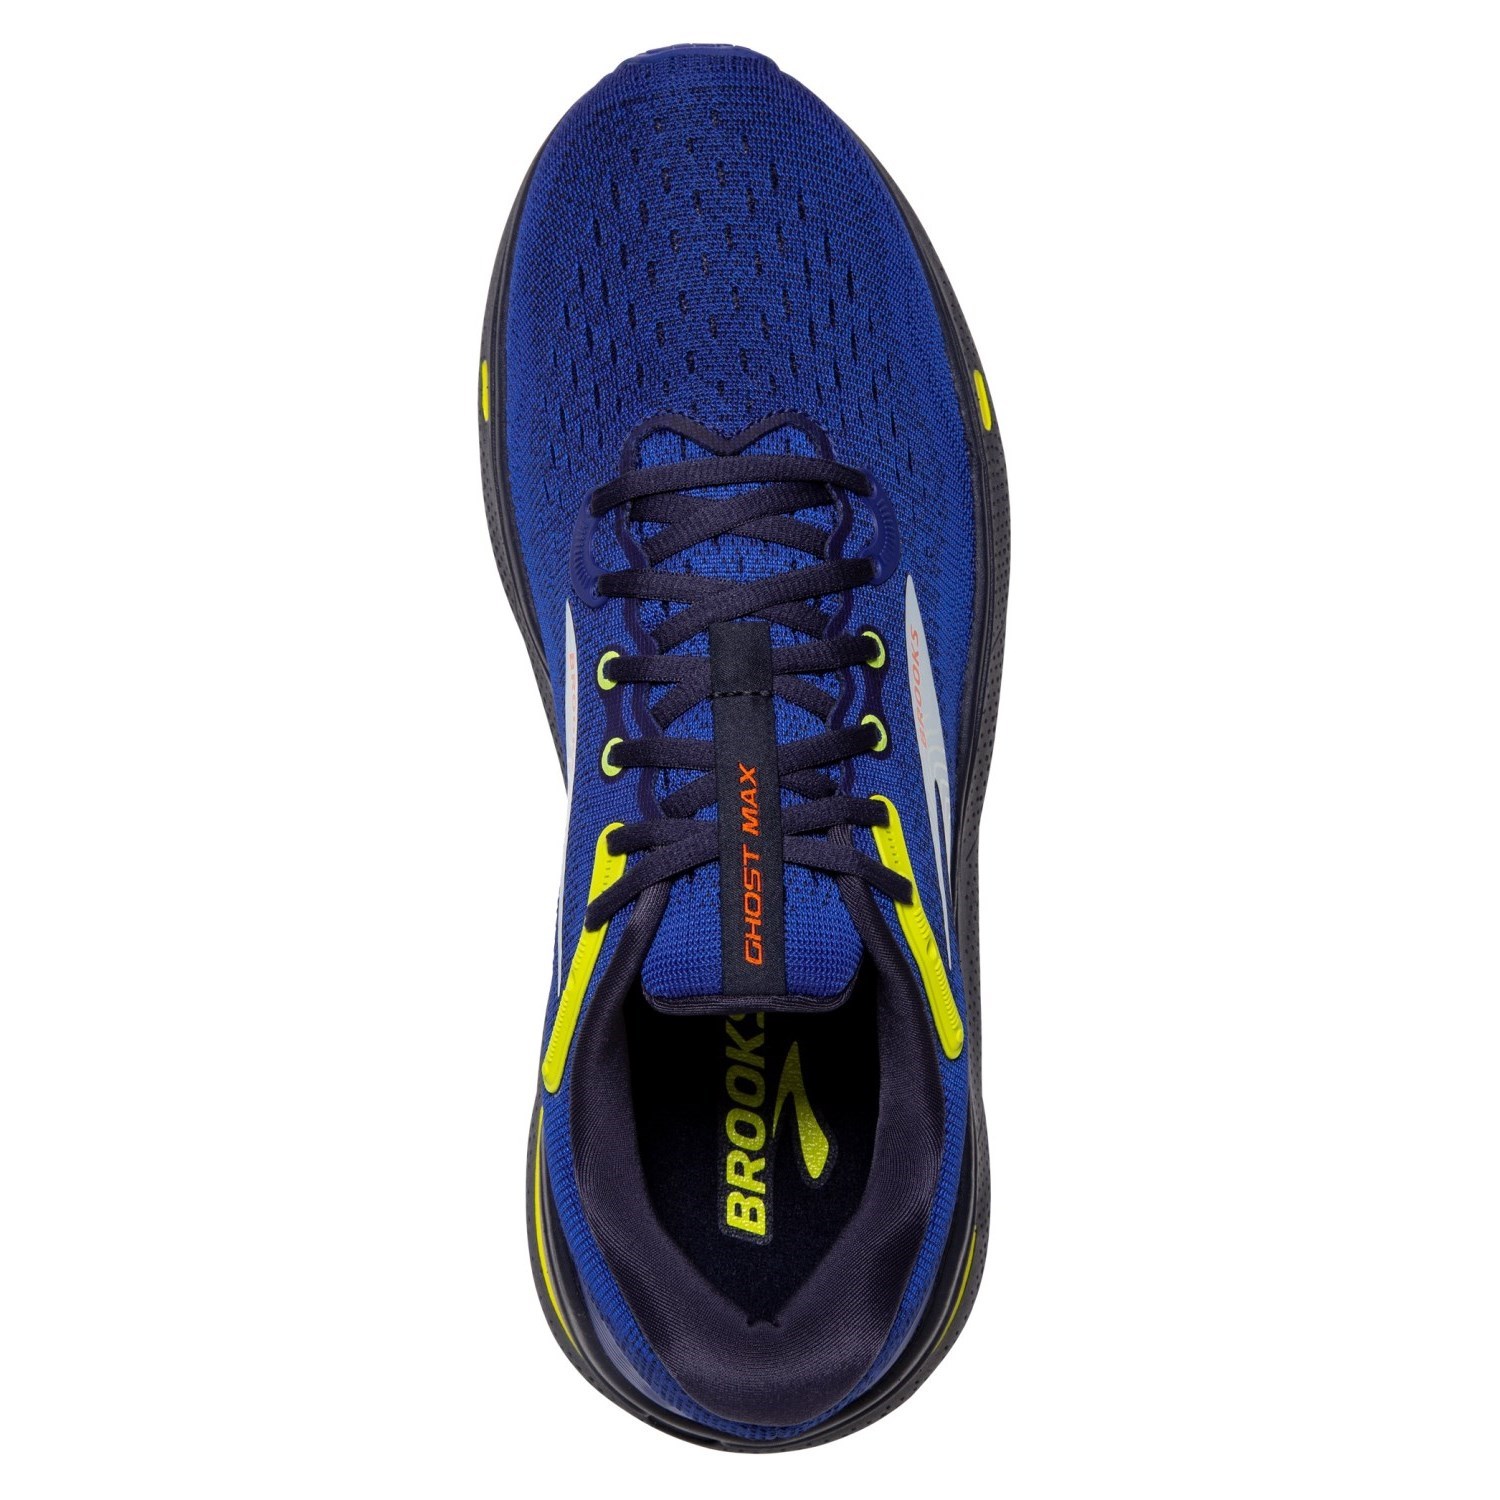 Brooks Ghost Max - Mens Running Shoes - Surf The Web/Peacoat/Sulphur ...